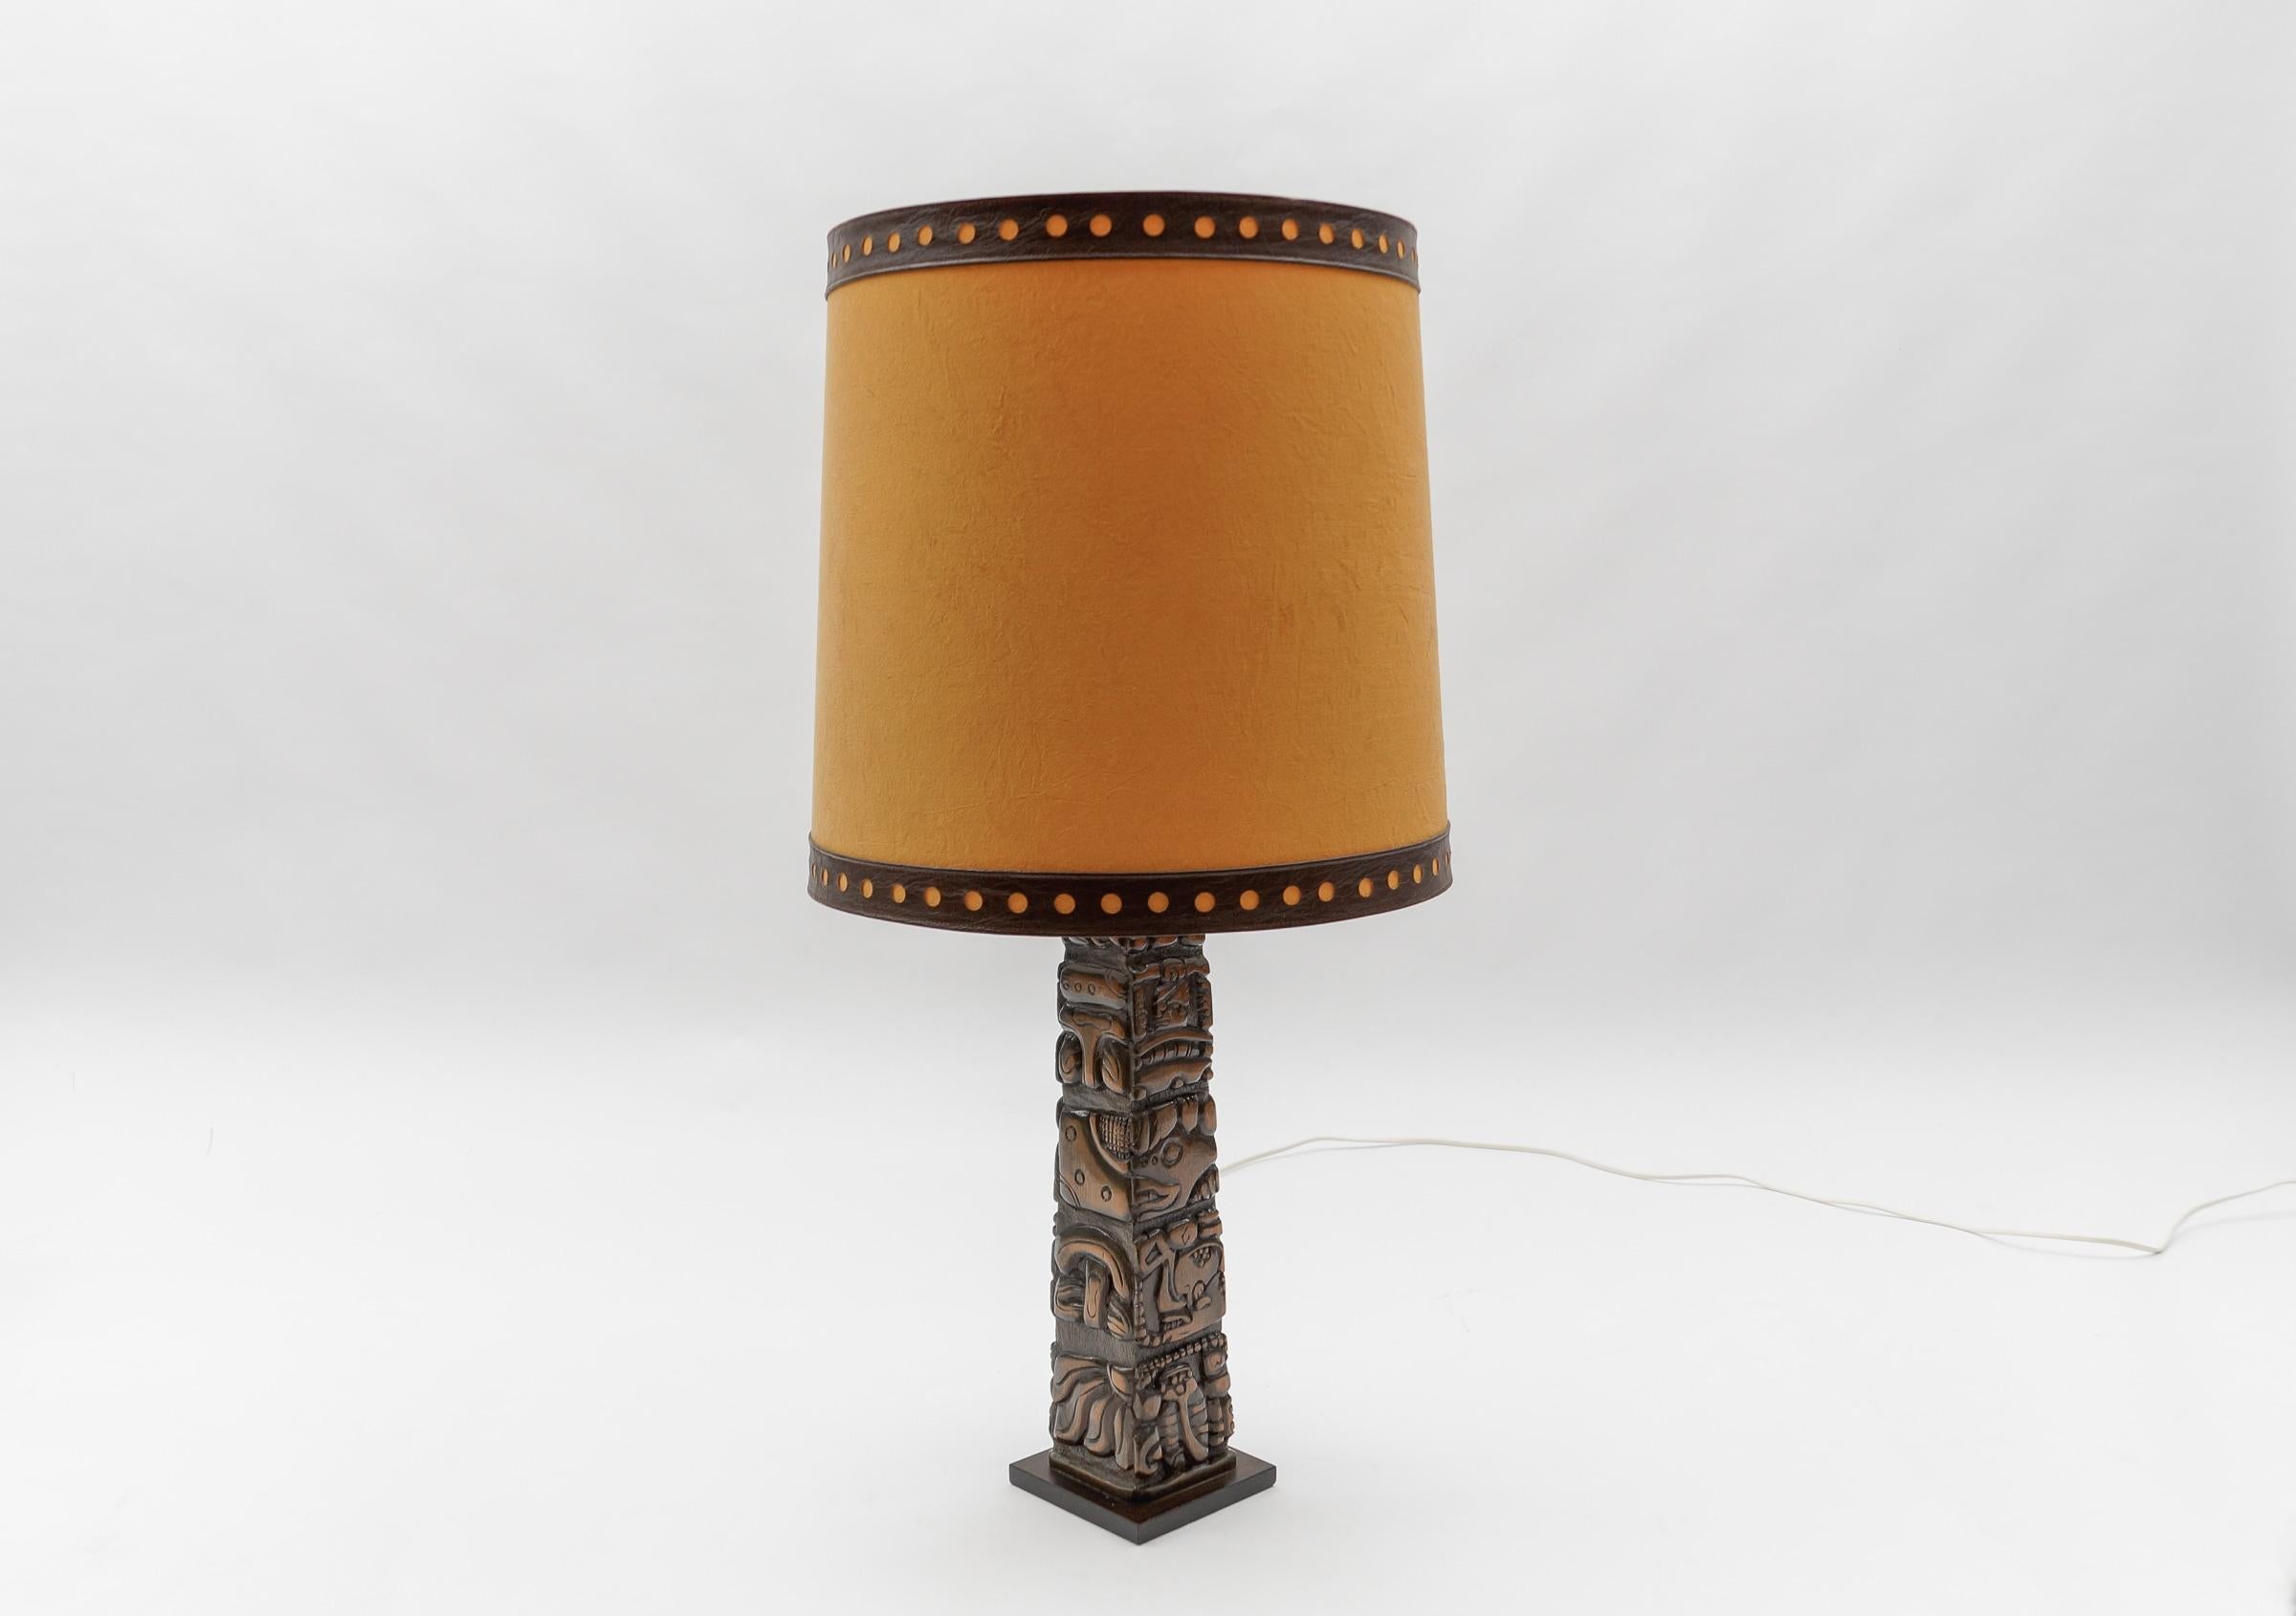 Hand-Carved Hand Carved Wooden Mayan Totem Table Lamp by Temde Honduras, Switzerland 1960s For Sale